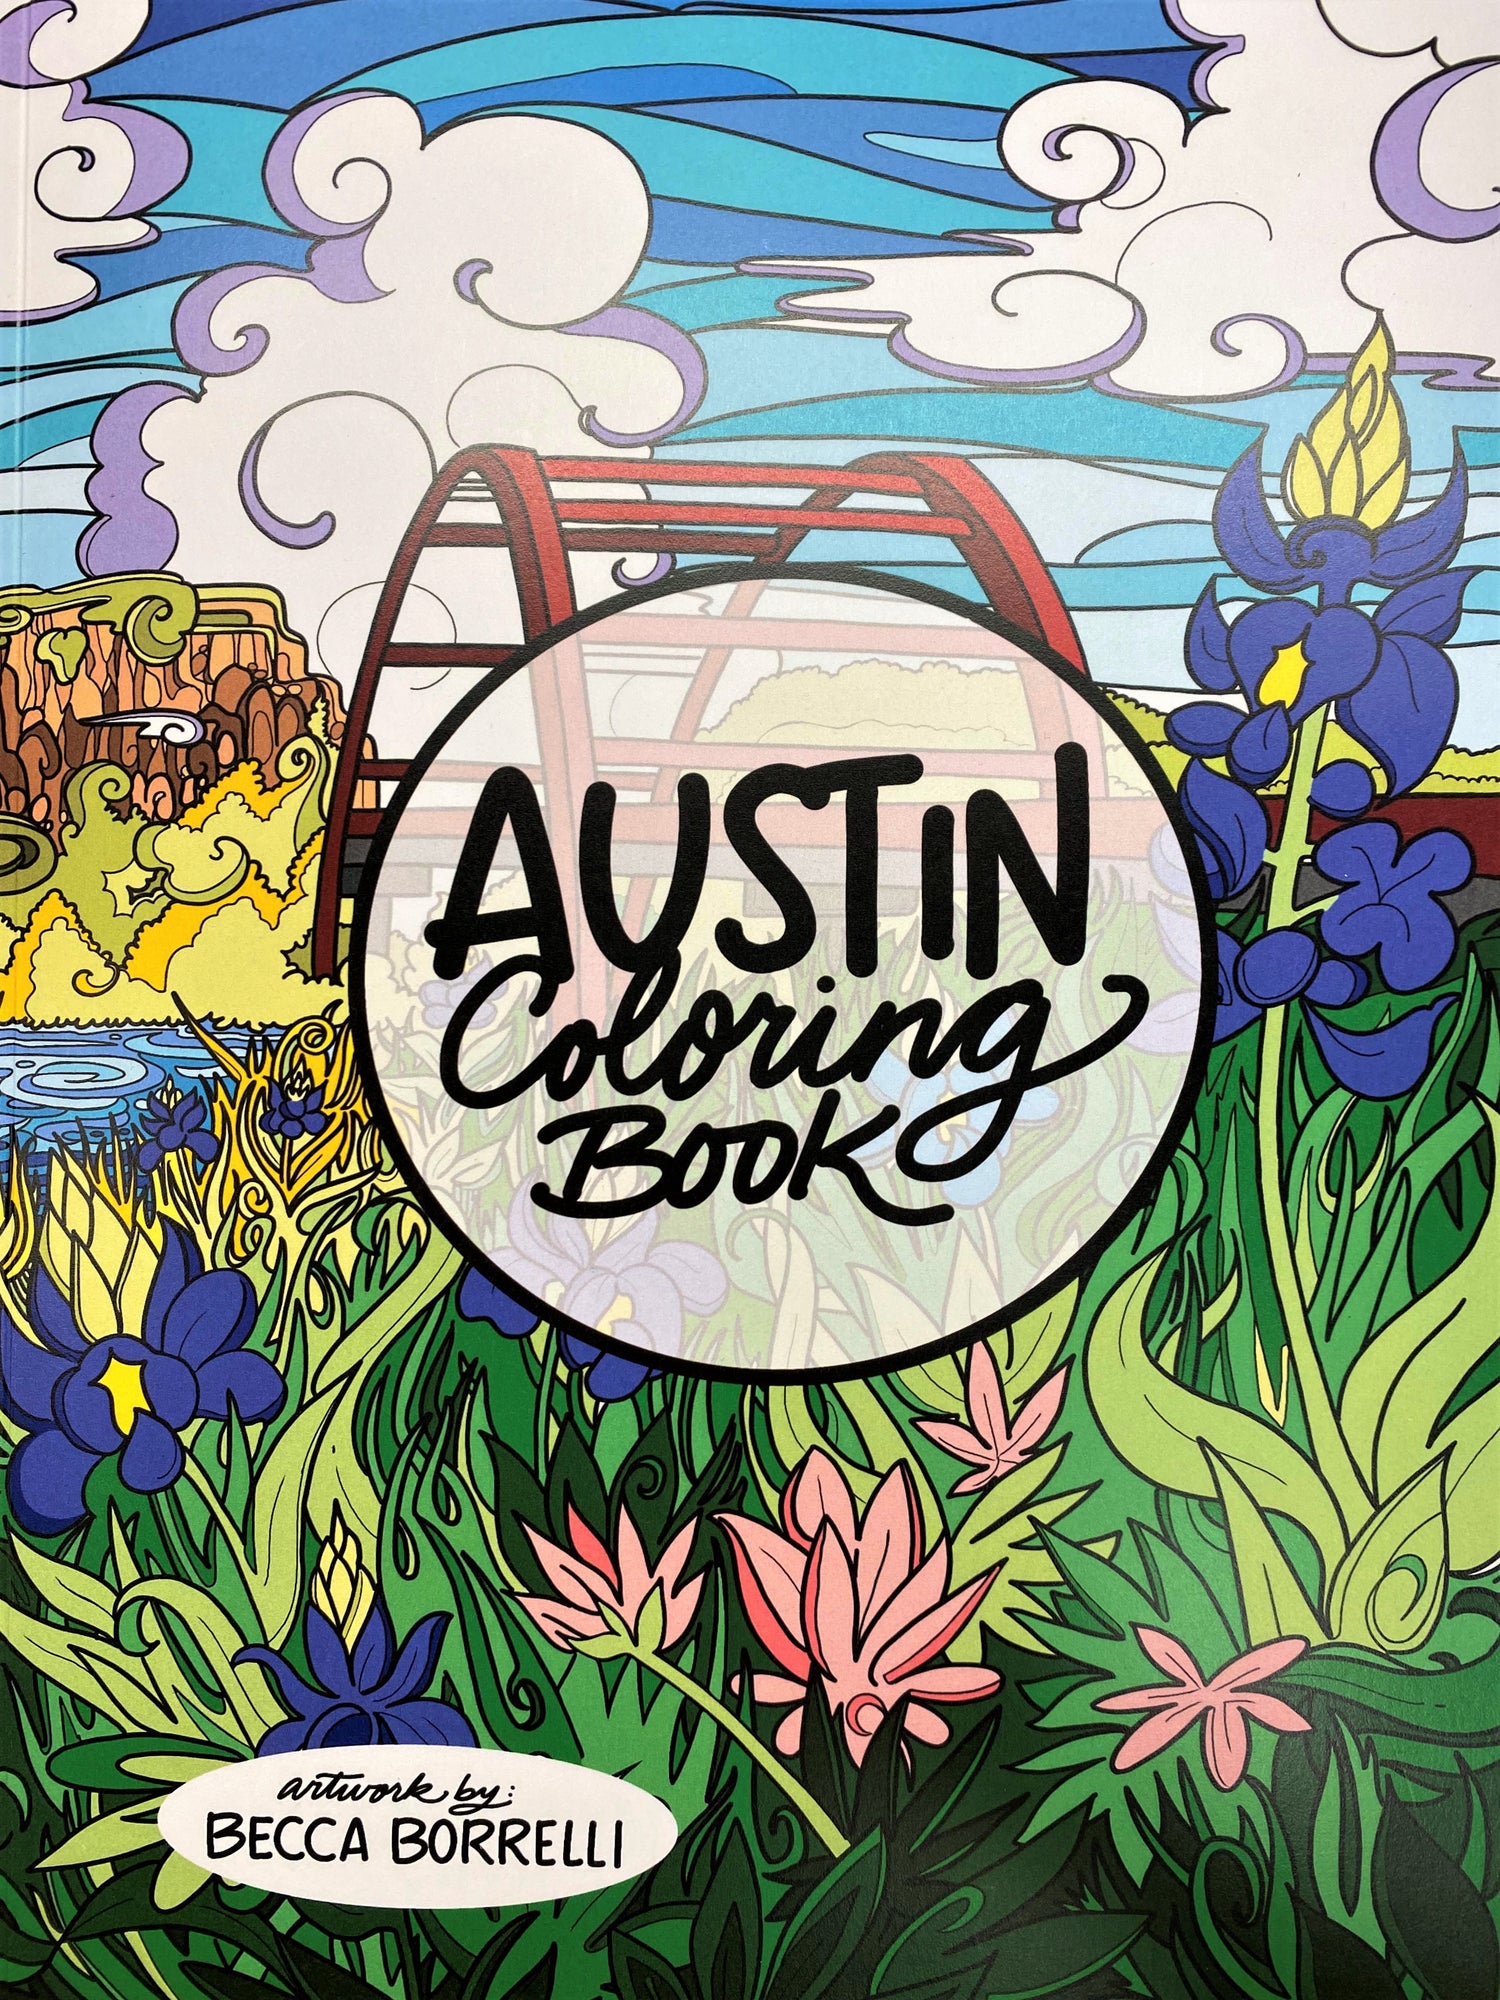 Hand-drawn 8x10" soft cover Austin adult coloring book by Becca Borelli: 20 black and white illustrations of noteworthy landmarks, waiting to be brought to life through imaginative color! Fresh, new cover and digitally re-mastered images are great for sharing, or even removing from the book to frame.